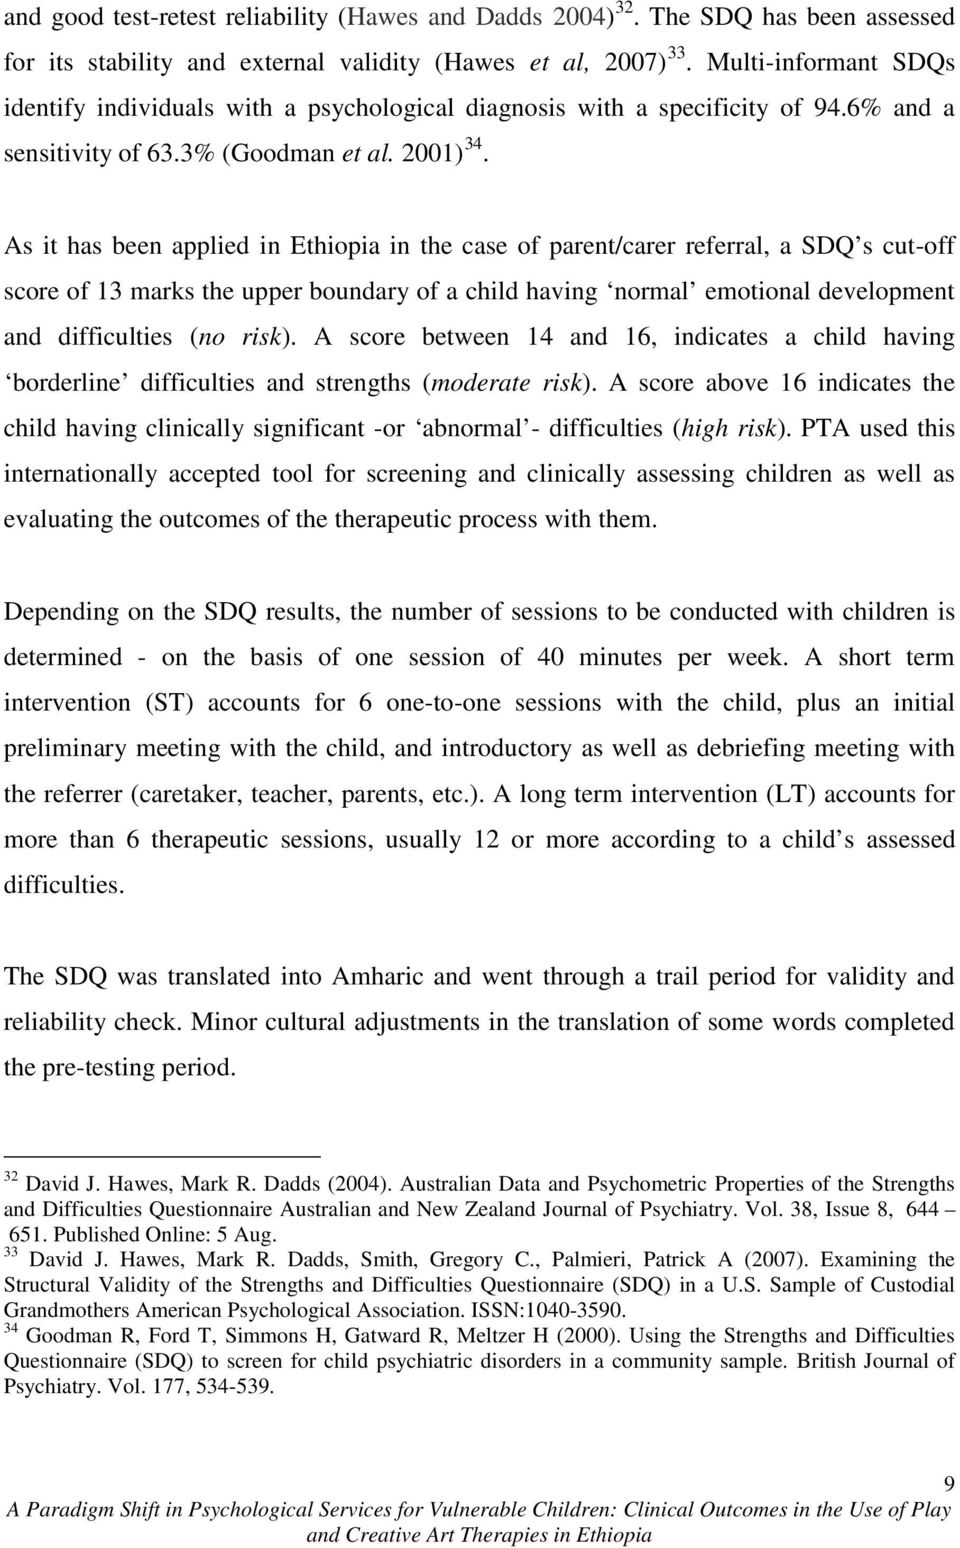 As it has been applied in Ethiopia in the case of parent/carer referral, a SDQ s cut-off score of 13 marks the upper boundary of a child having normal emotional development and difficulties (no risk).